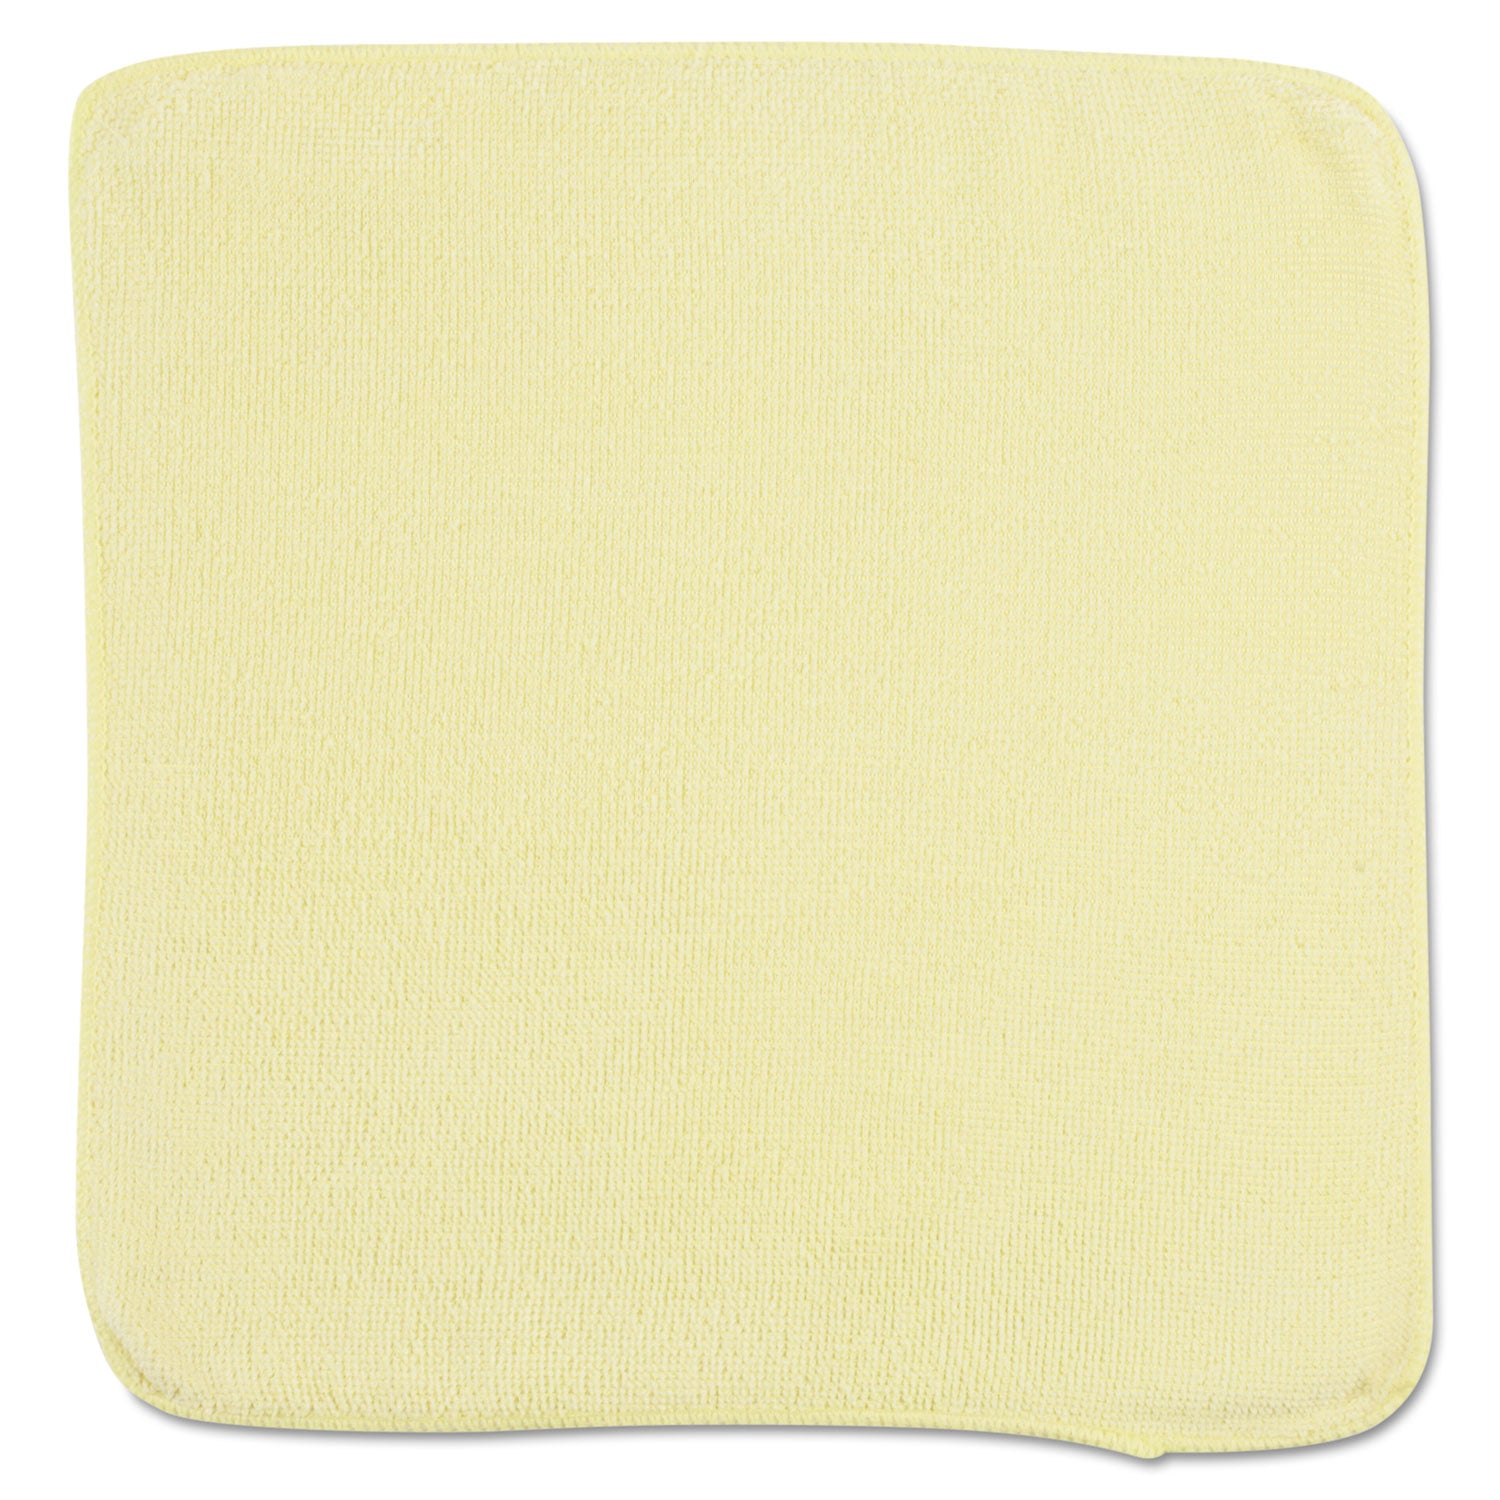 Microfiber Cleaning Cloths, 12 x 12, Yellow, 24/Pack - 